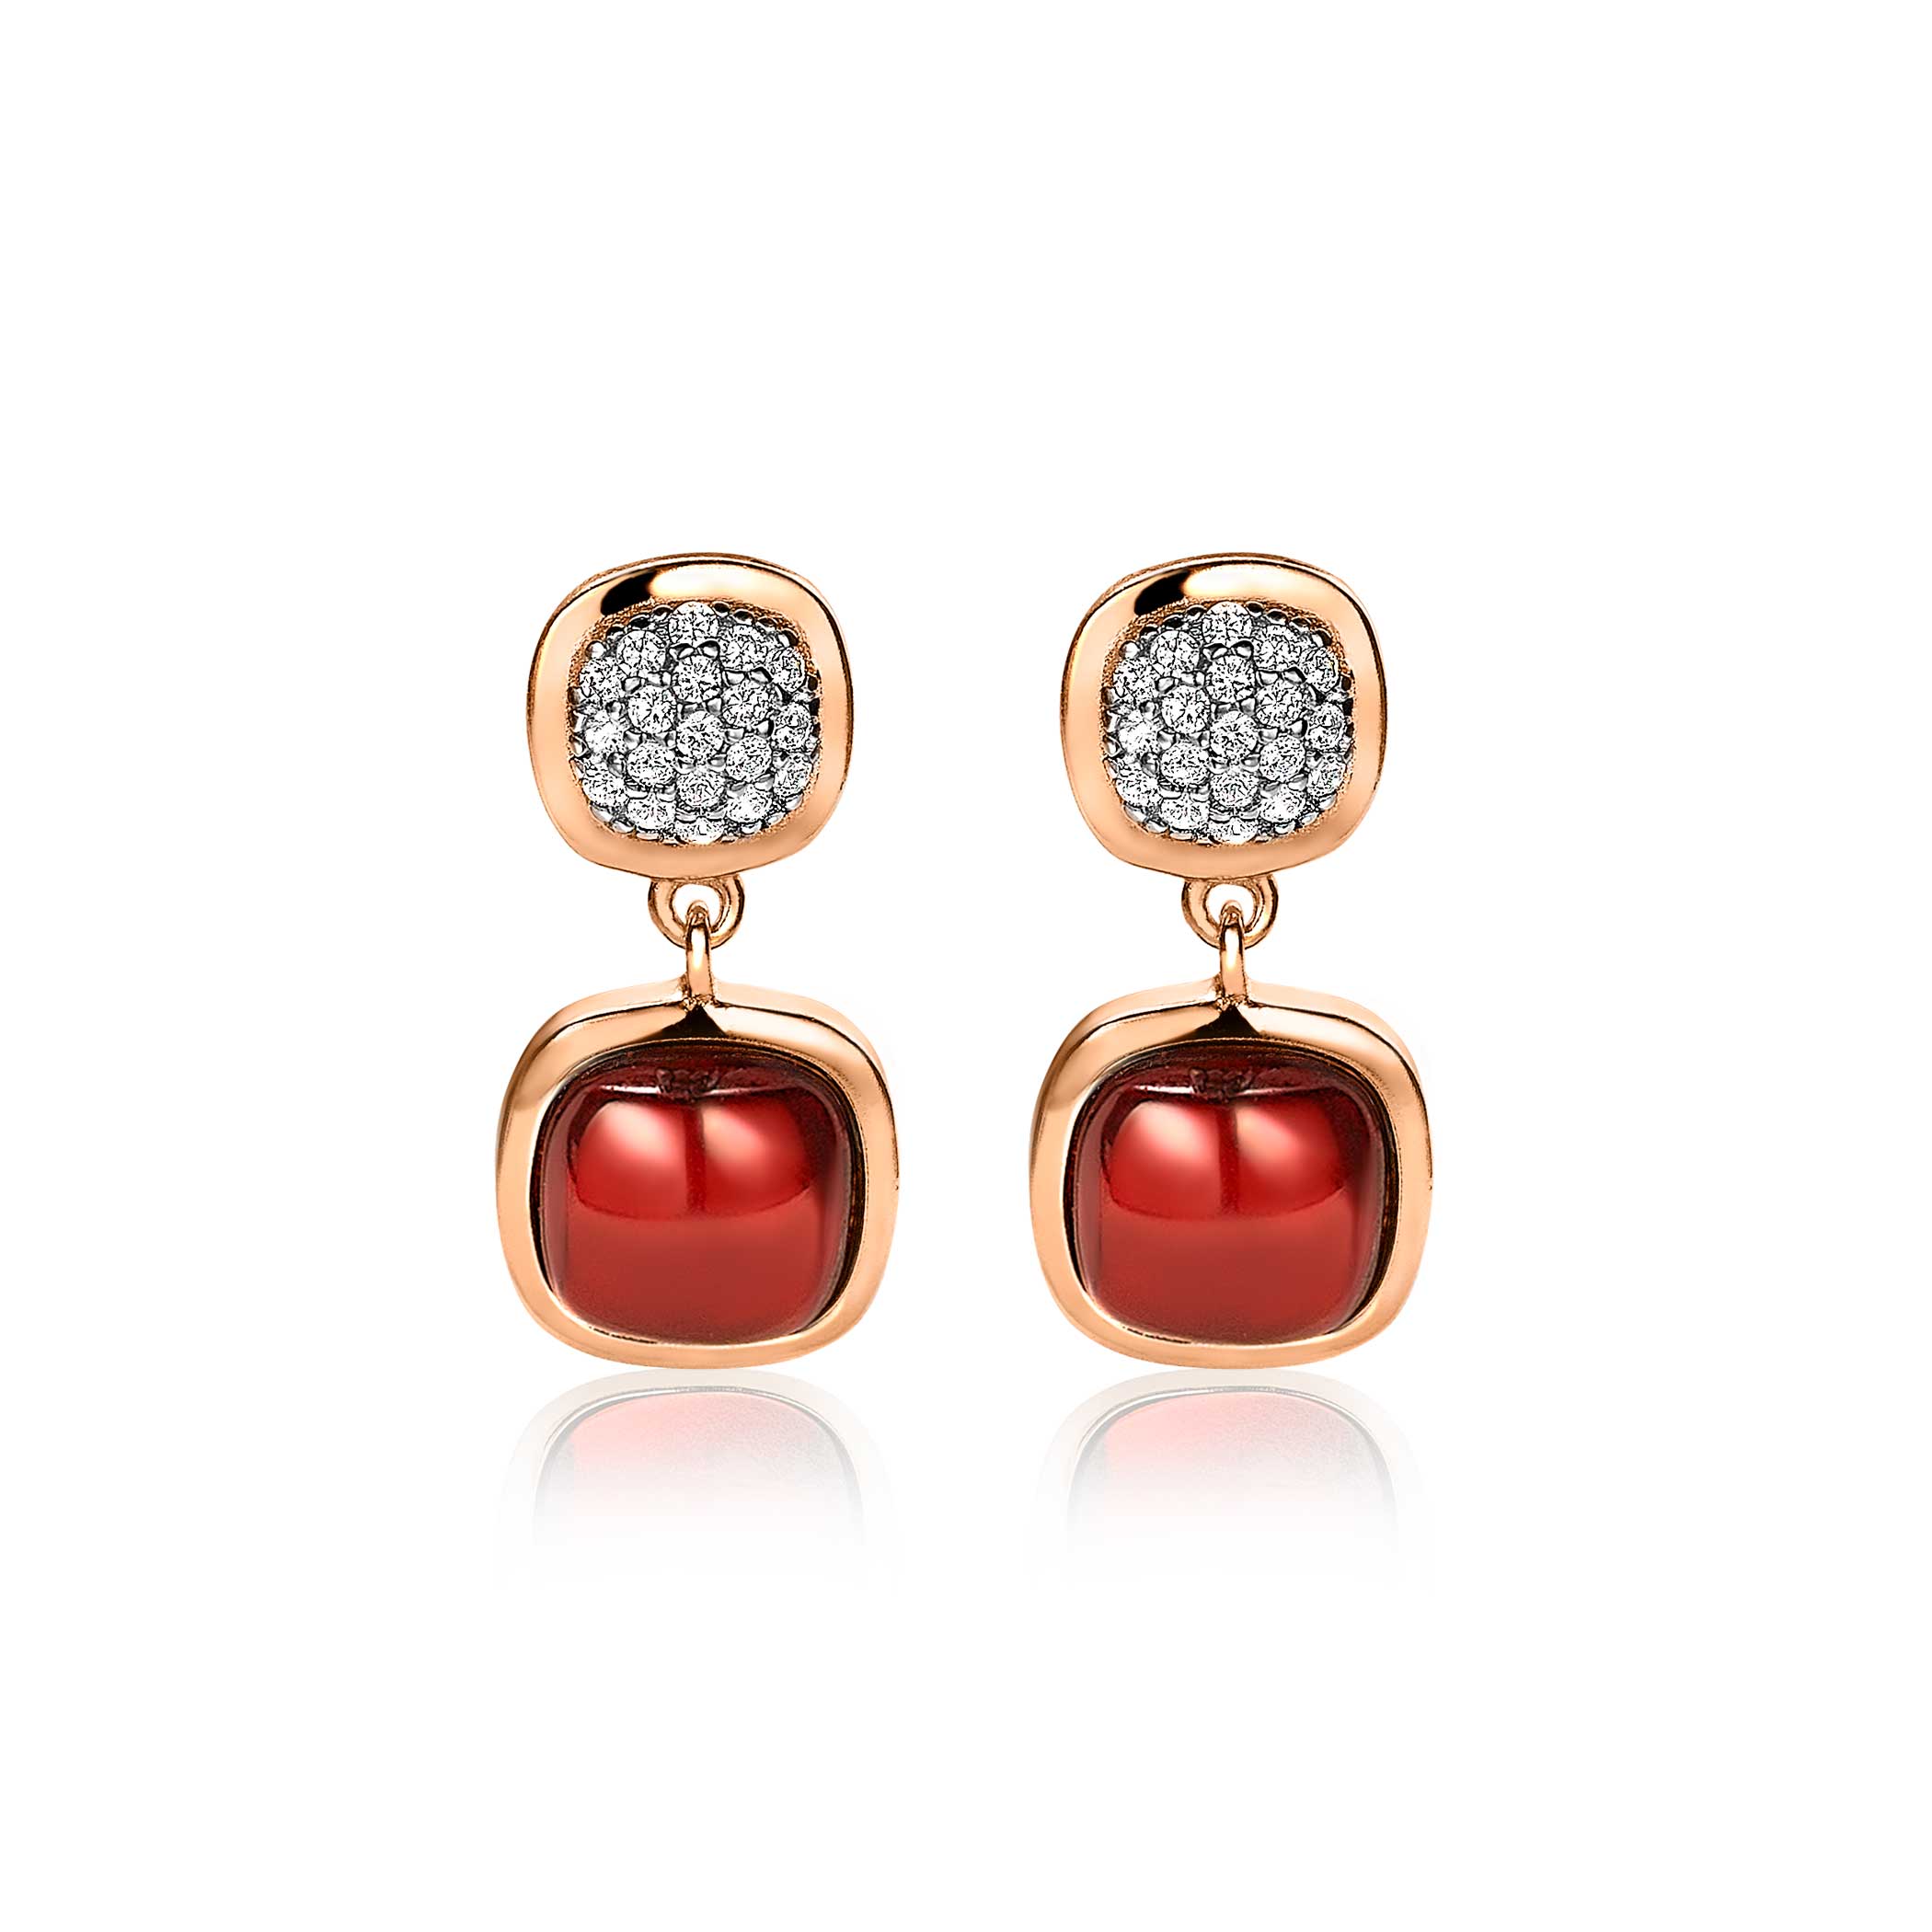 ZINZI Rose Gold Plated Sterling Silver Stud Earrings Square Red White ZIO1717